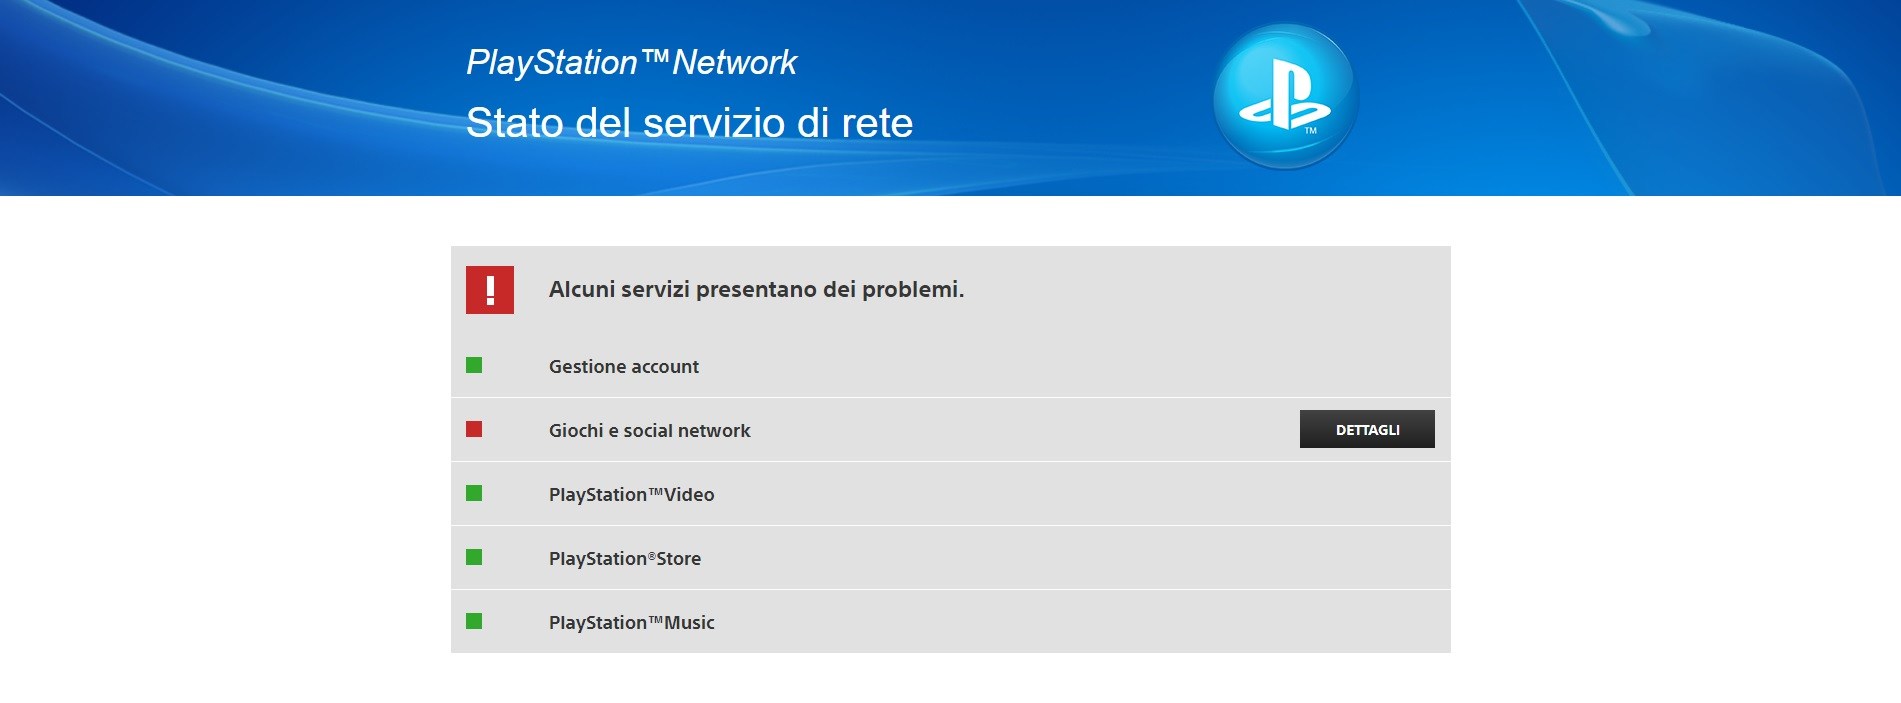 PlayStation Network (7 settembre)